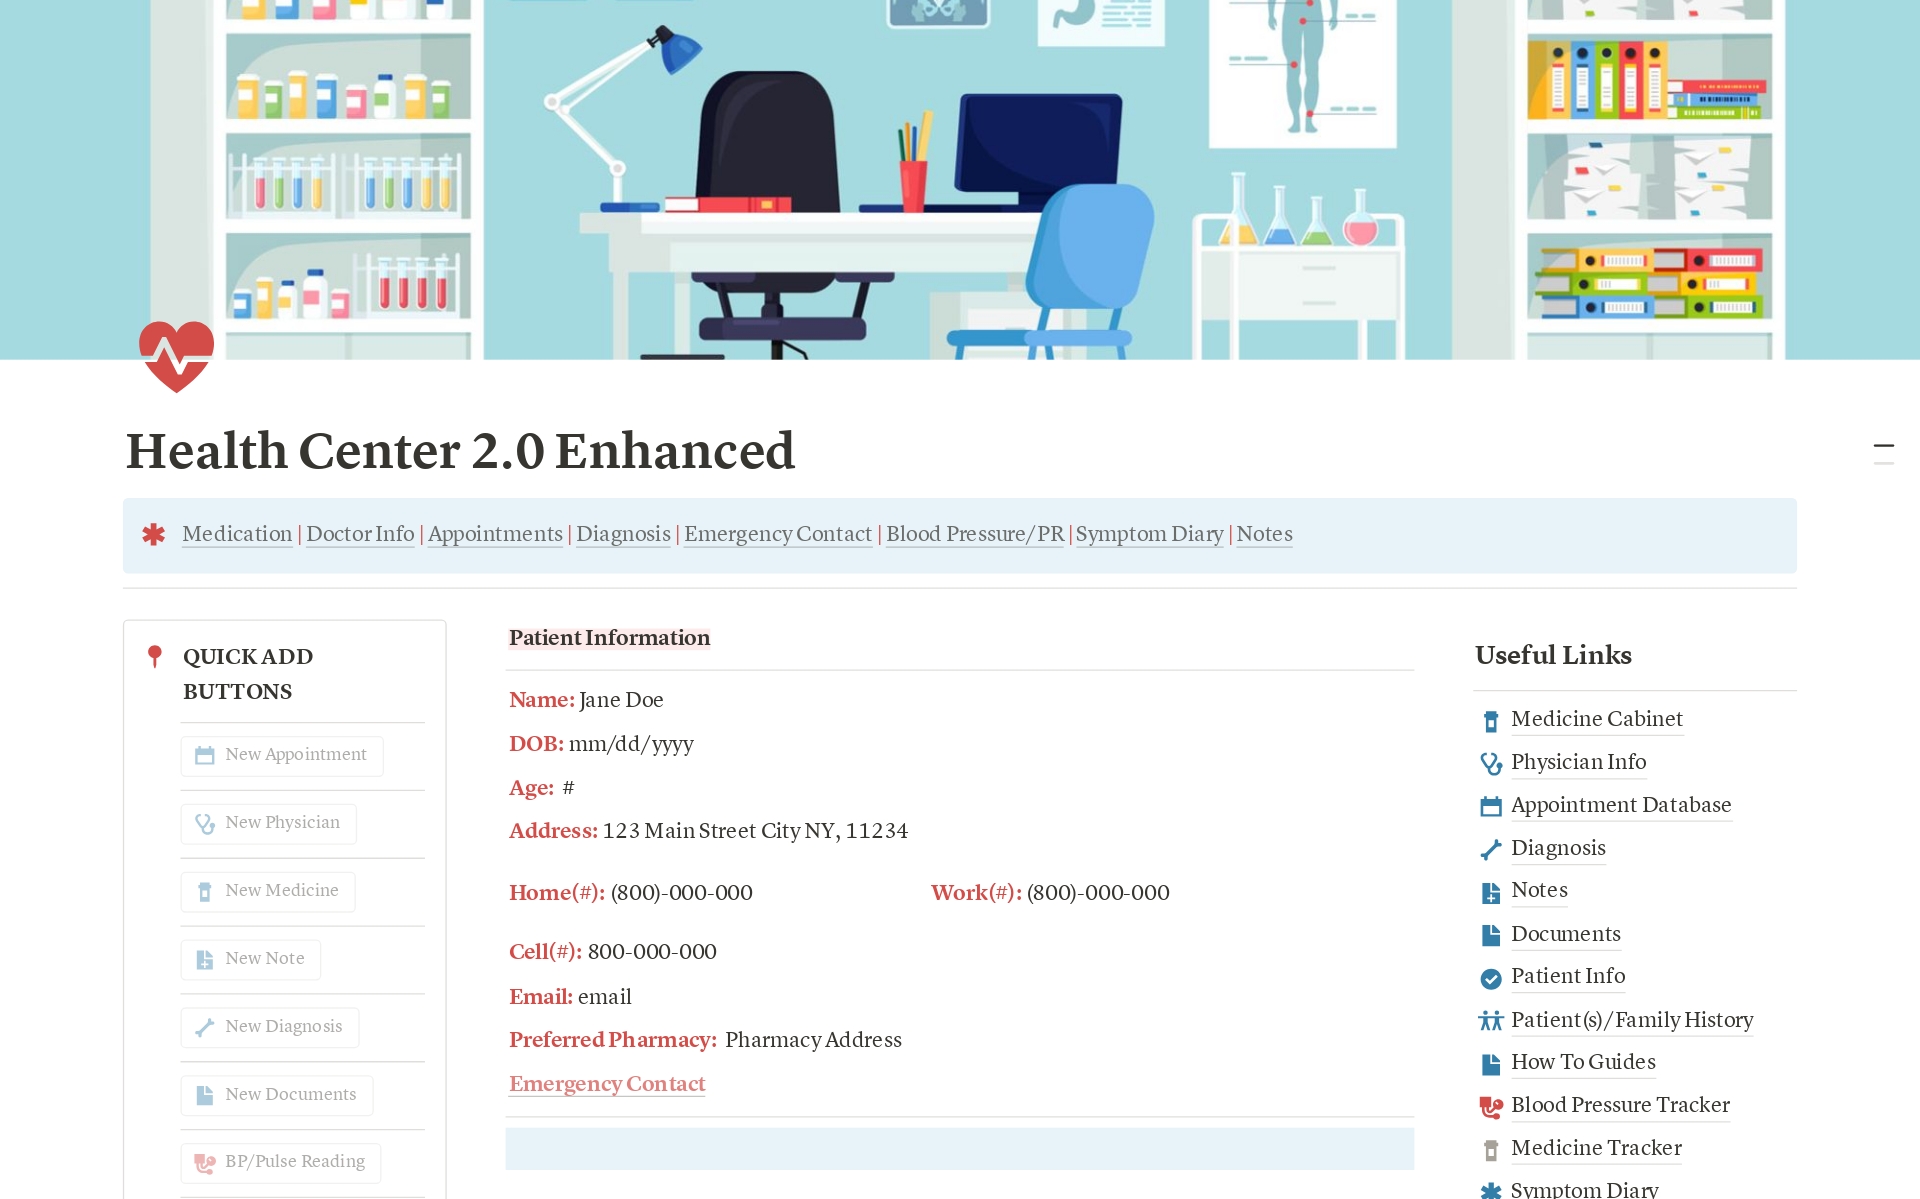 
Health Center 2.0 Enhanced is an advanced health management tool that offers comprehensive features like medication and symptom tracking, heart health monitoring, and an interactive dashboard for efficient personal and family health record-keeping.